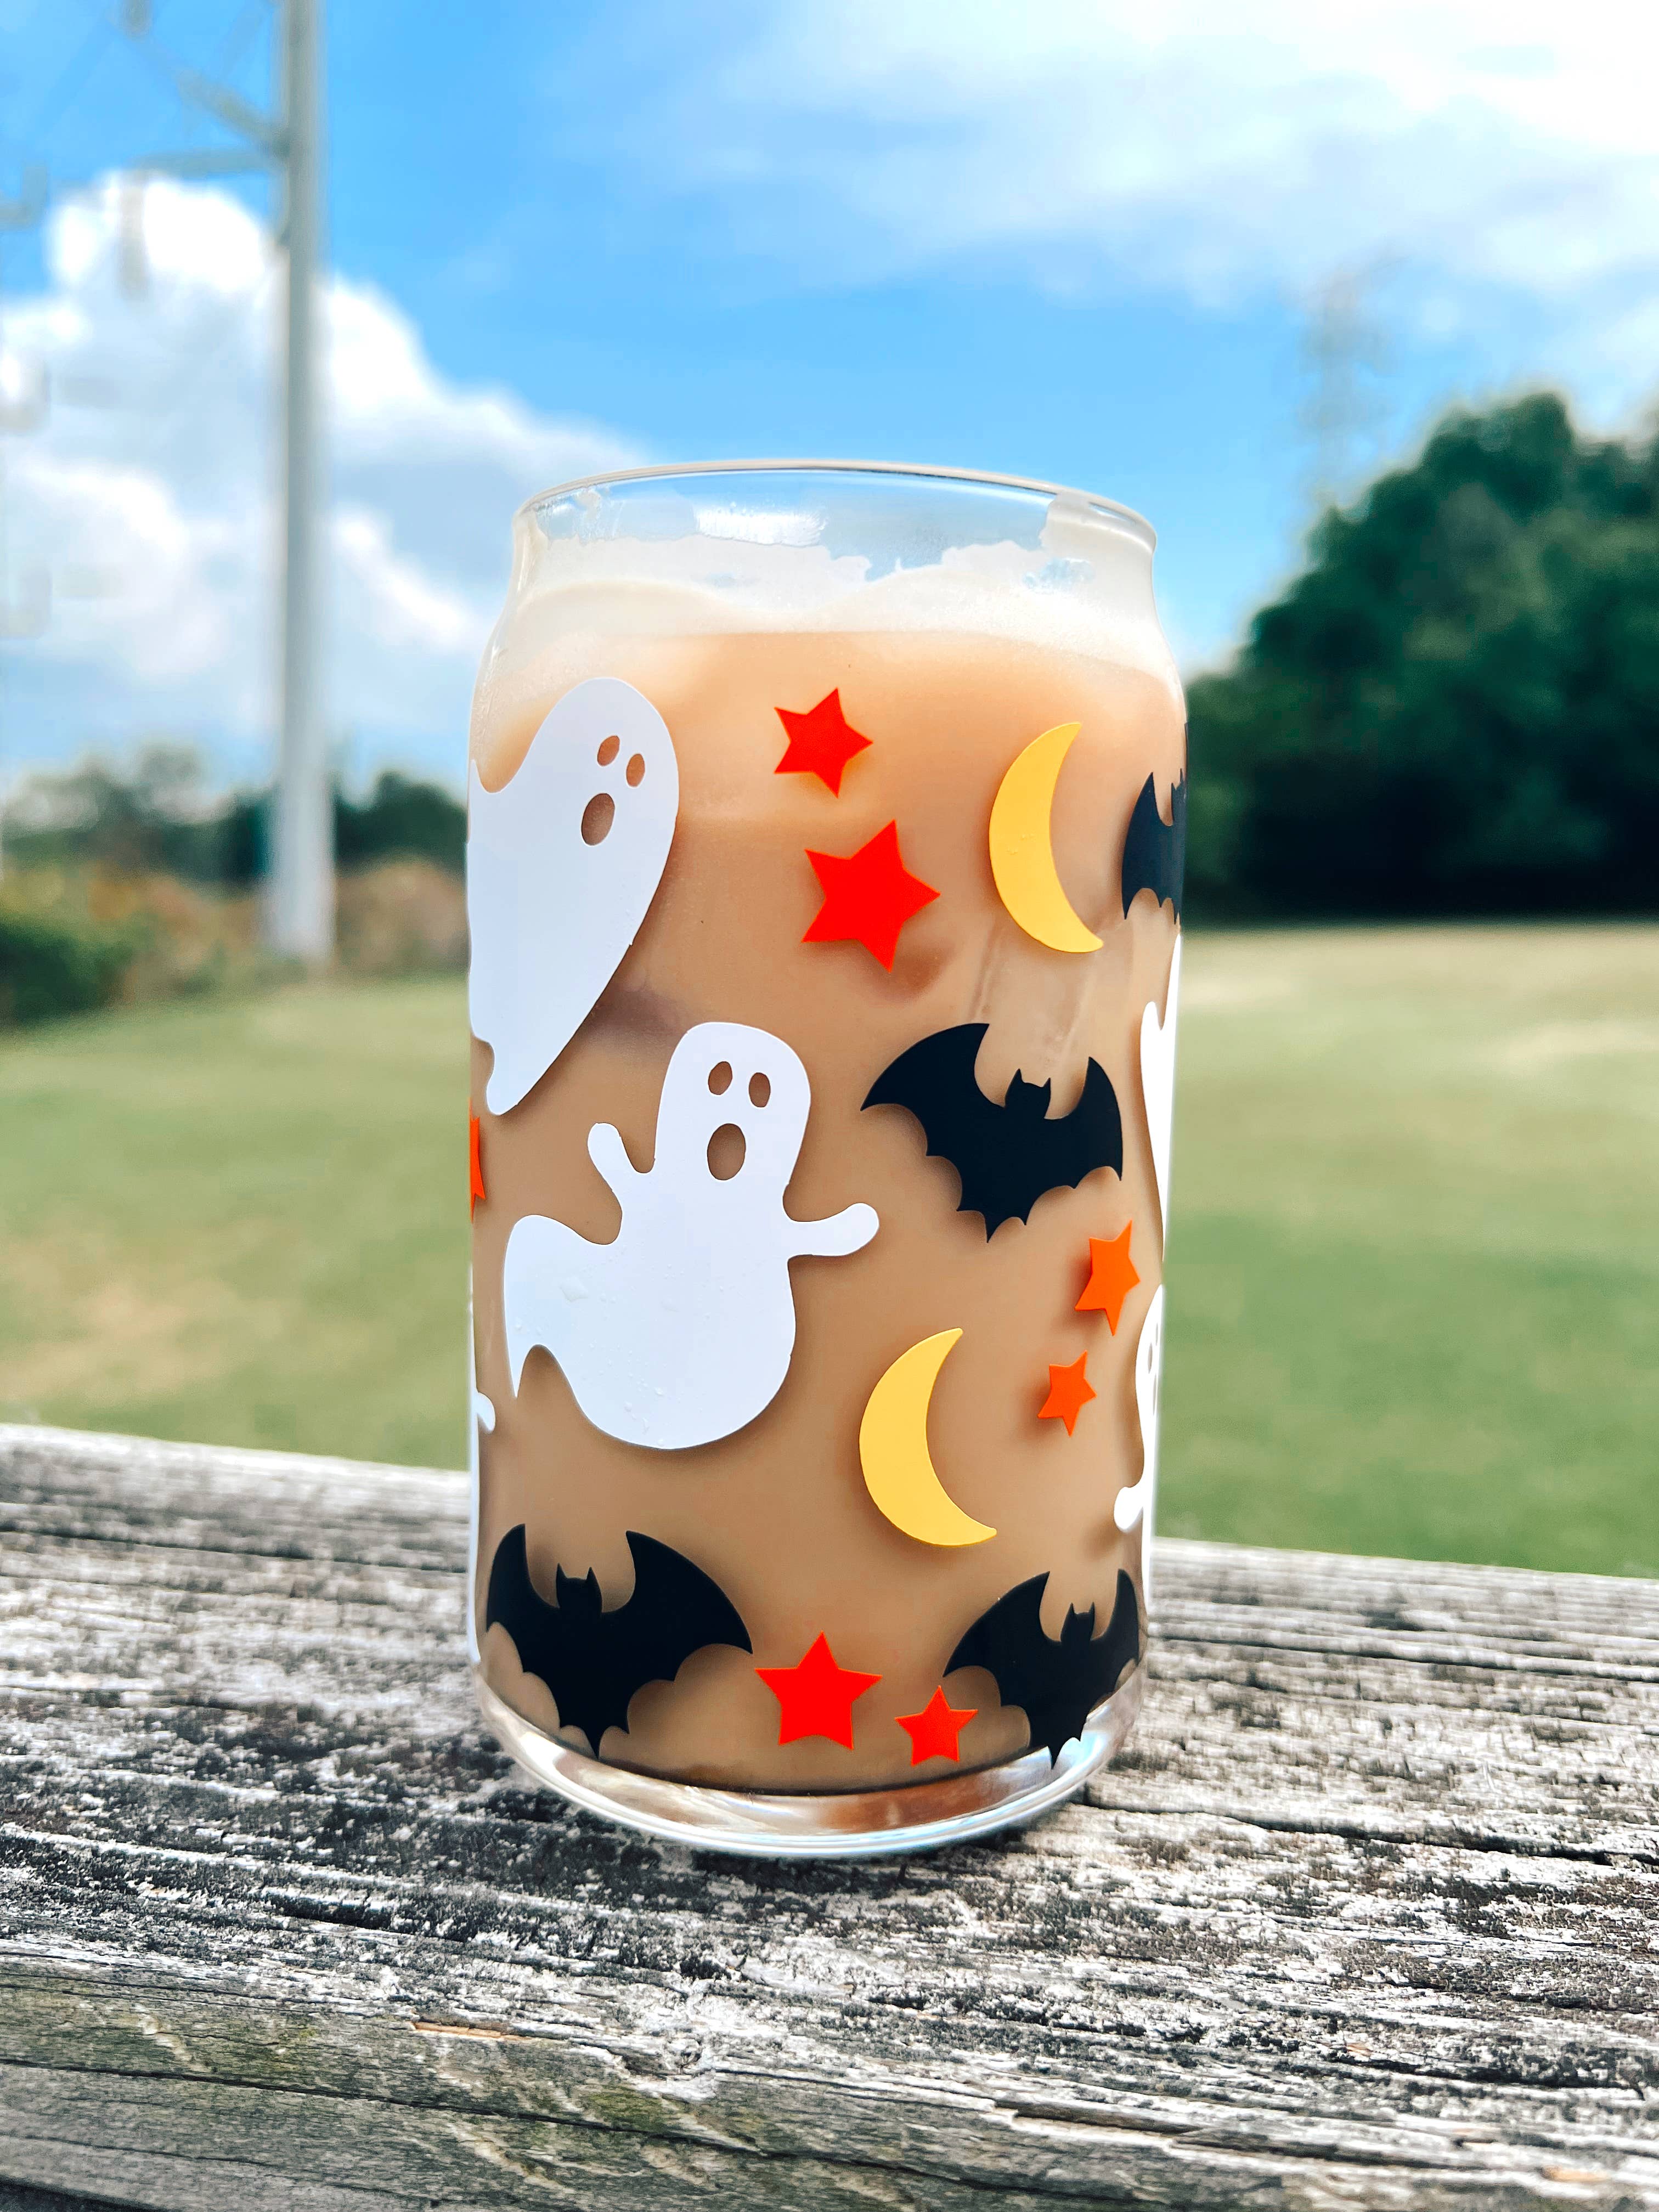 Lets Go Ghouls Ghost Halloween Glass Iced Coffee Cup With Bamboo Lid 